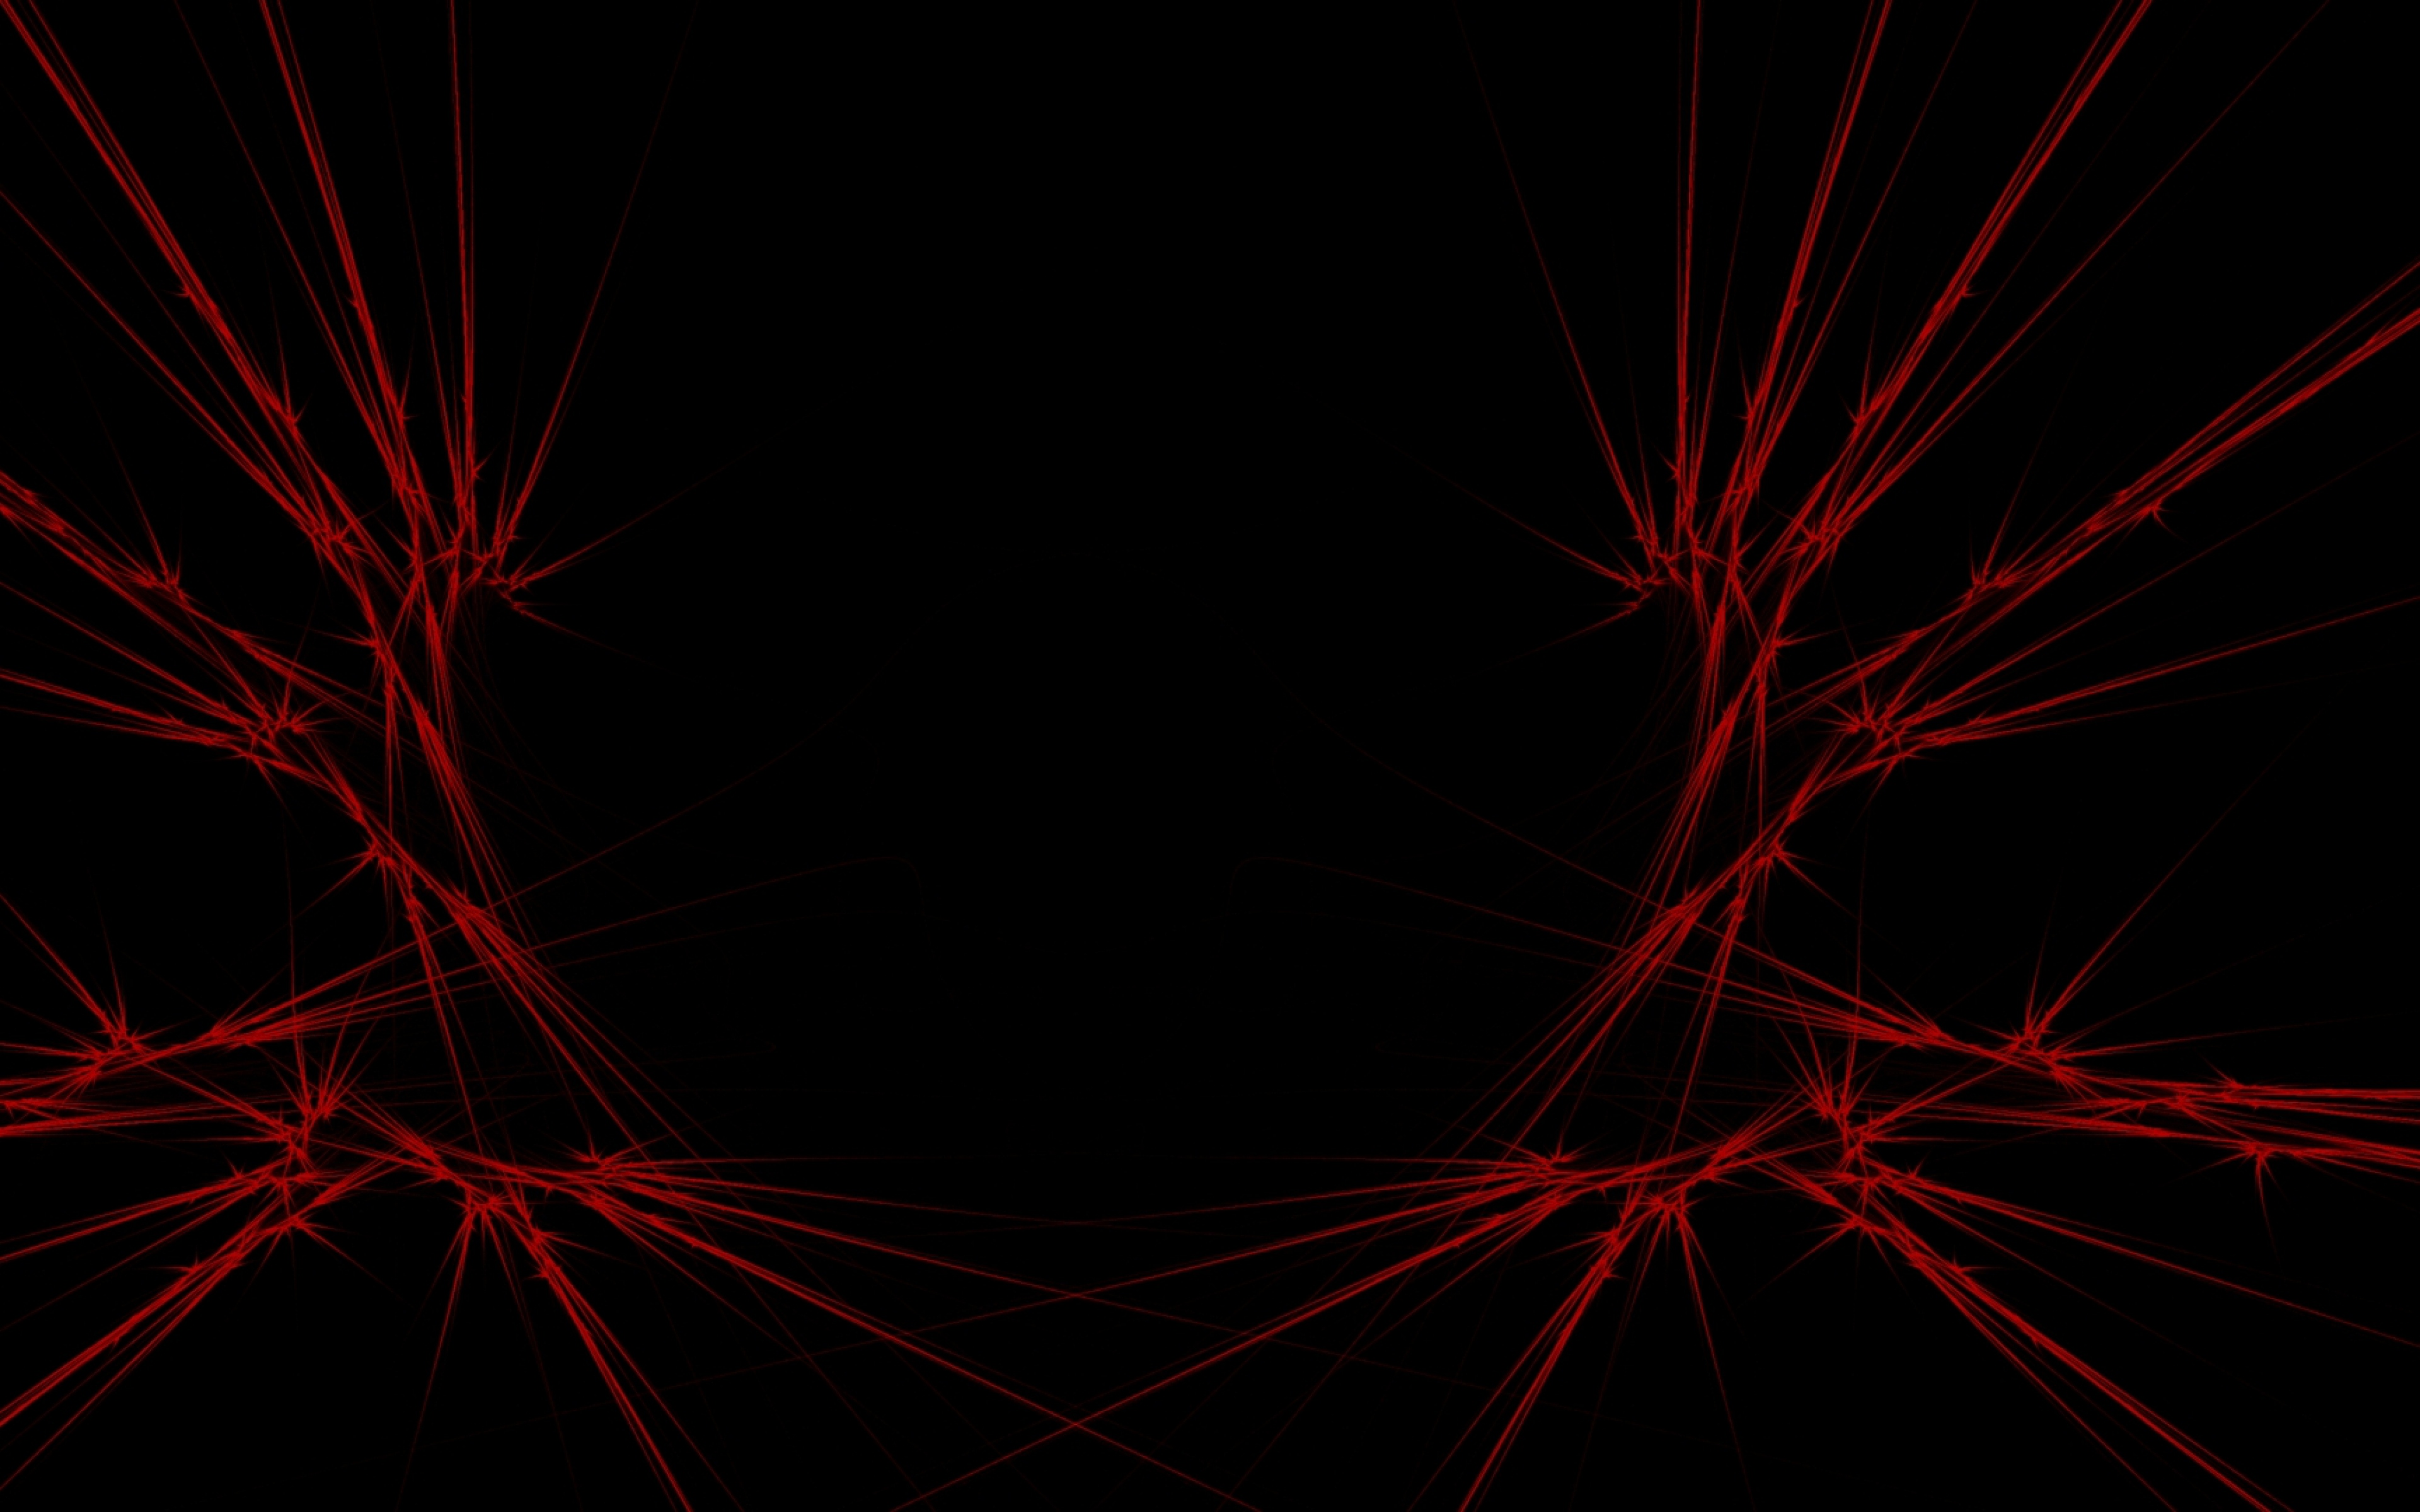  Wallpaper 3840x2400 red black abstract Ultra HD 4K HD Background